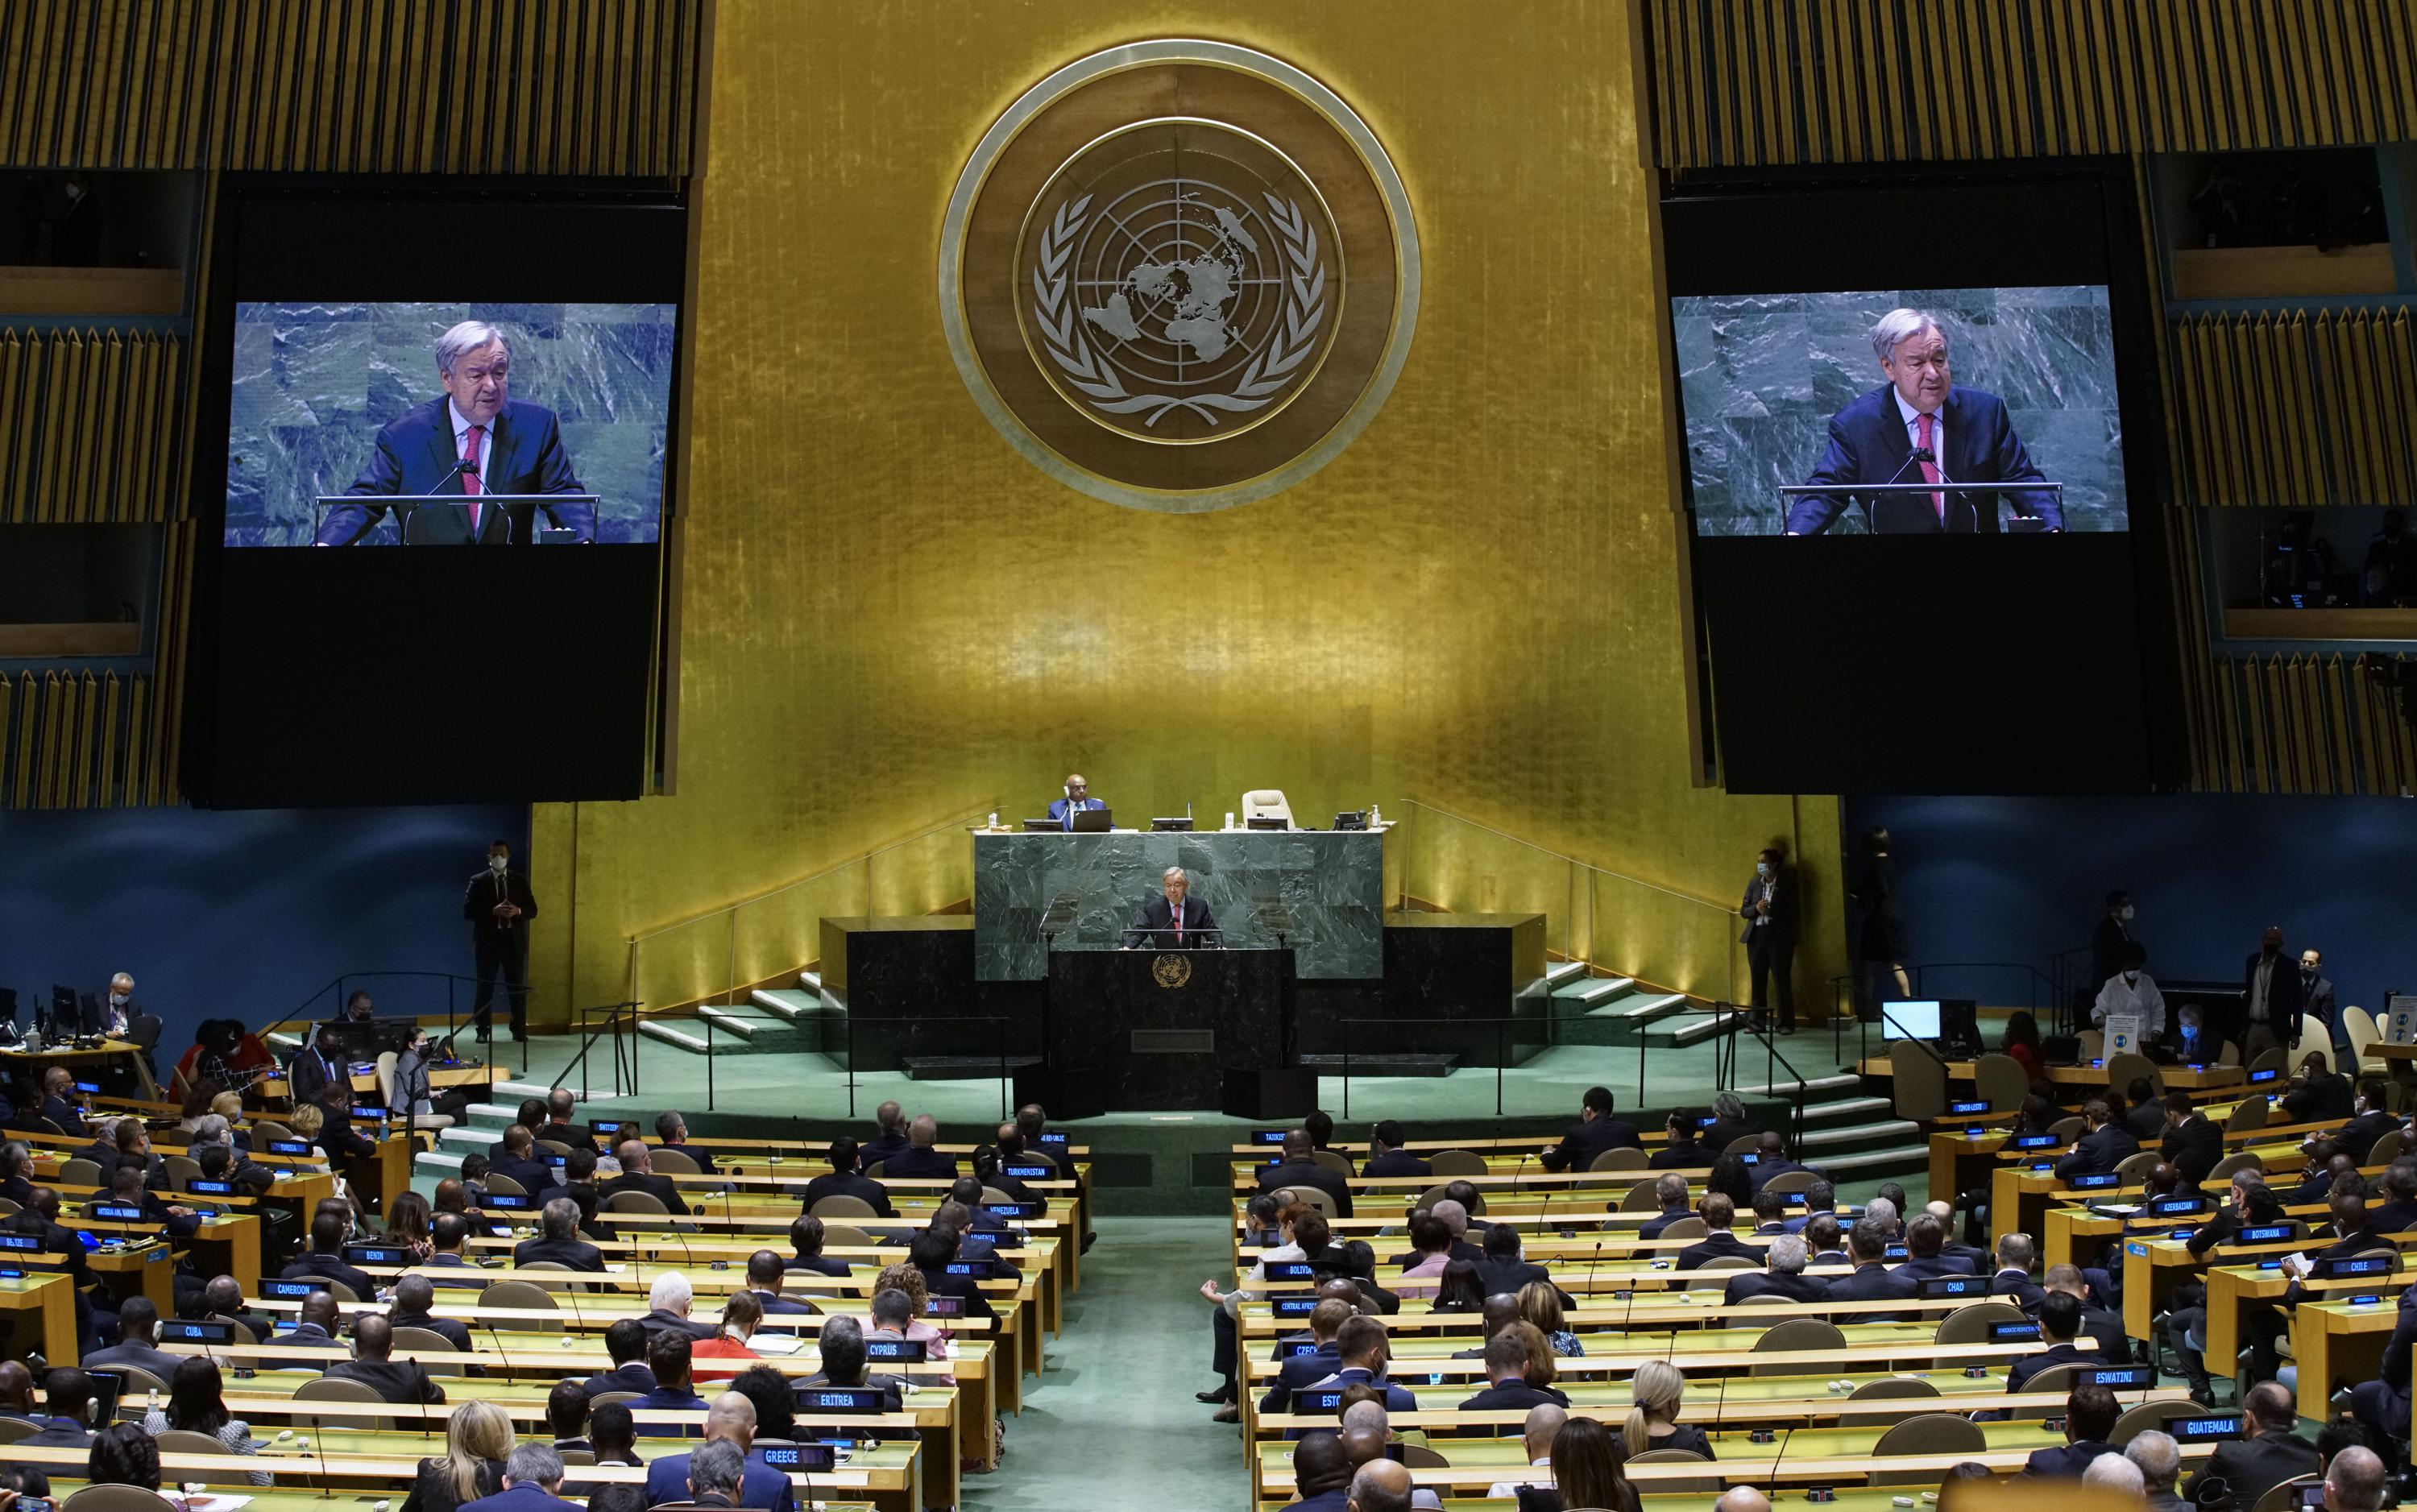 'The world must wake up' Tasks daunting as UN meeting opens AP News